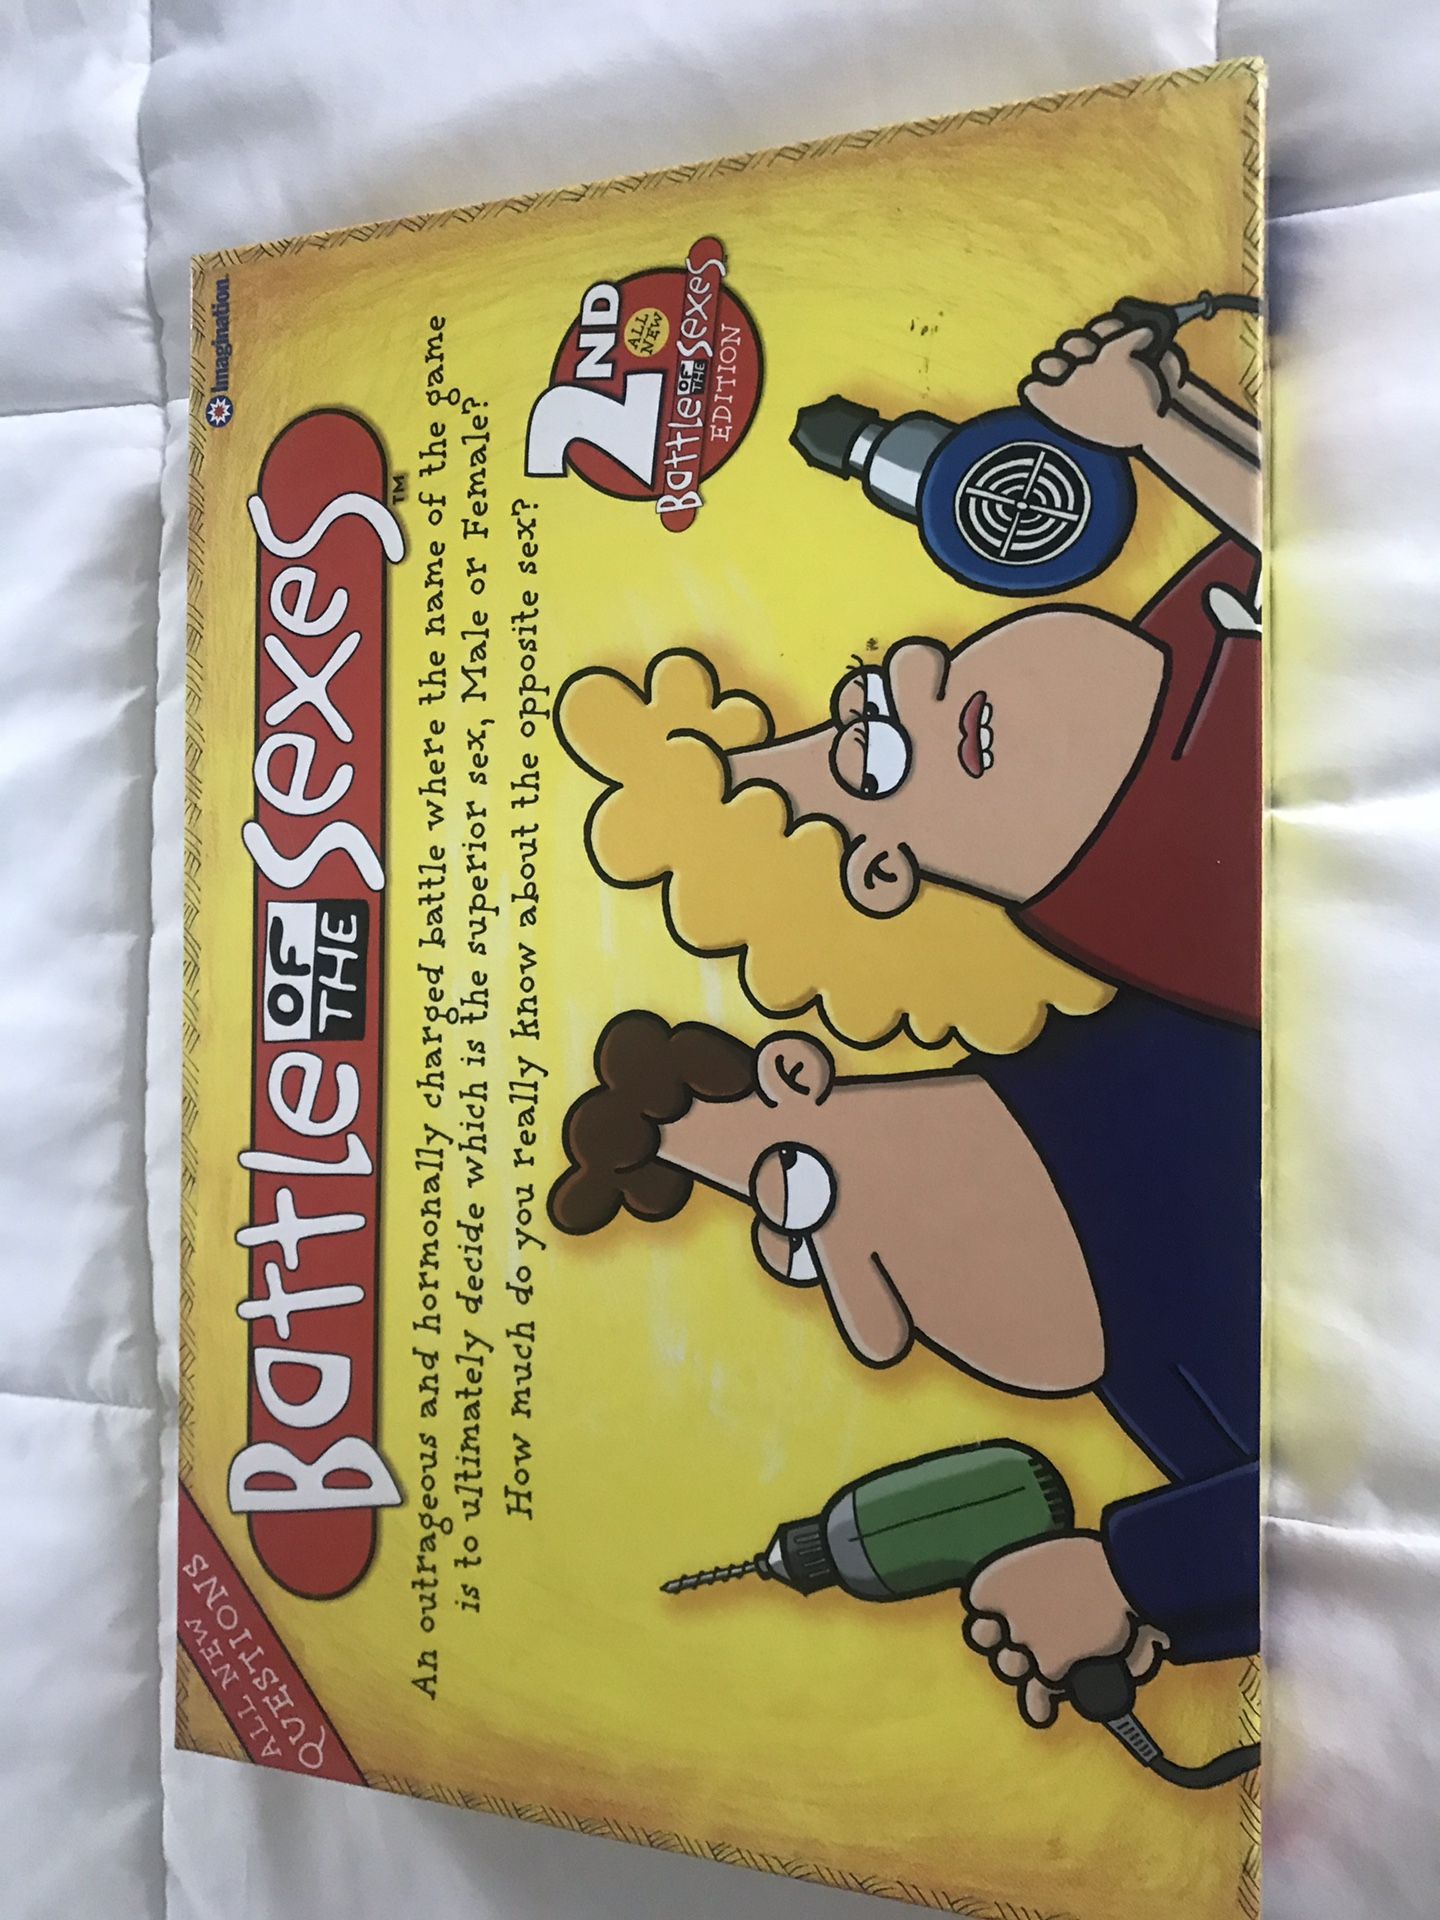 Battle of the sexes board game